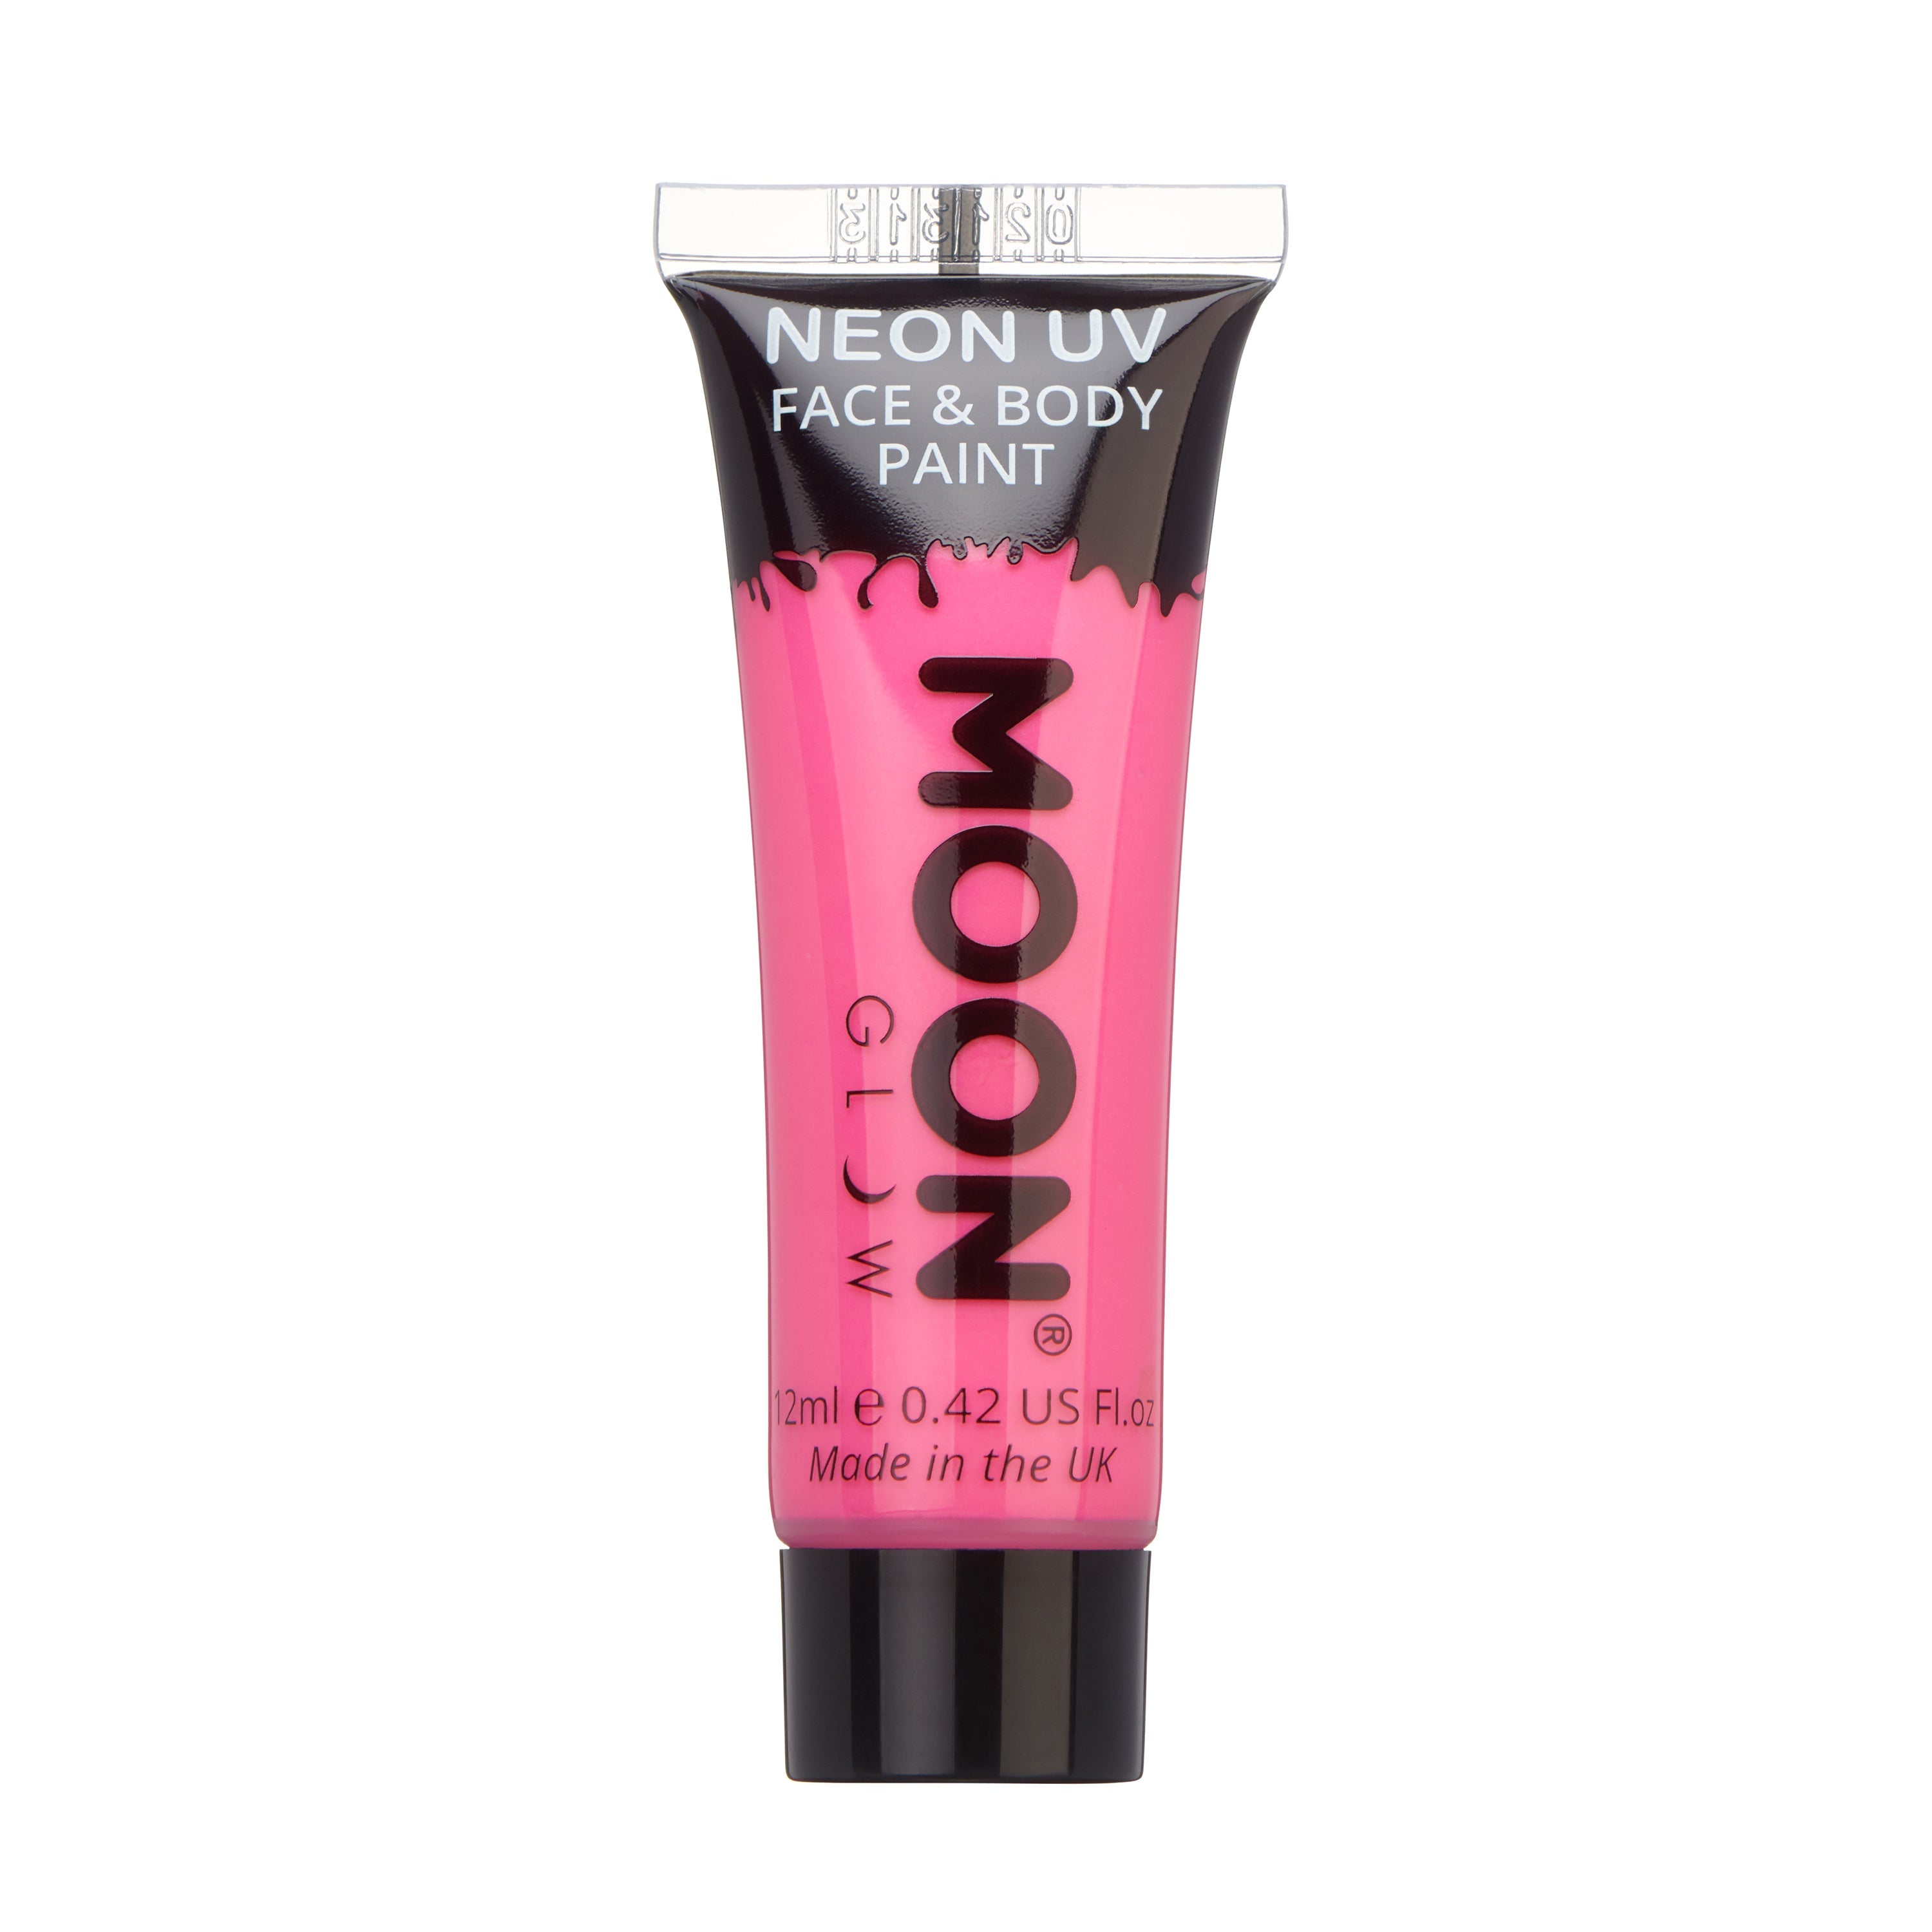 Intense Pink - Neon UV Glow Blacklight Face & Body Paint Makeup, 12mL. Cosmetically certified, FDA & Health Canada compliant, cruelty free and vegan.